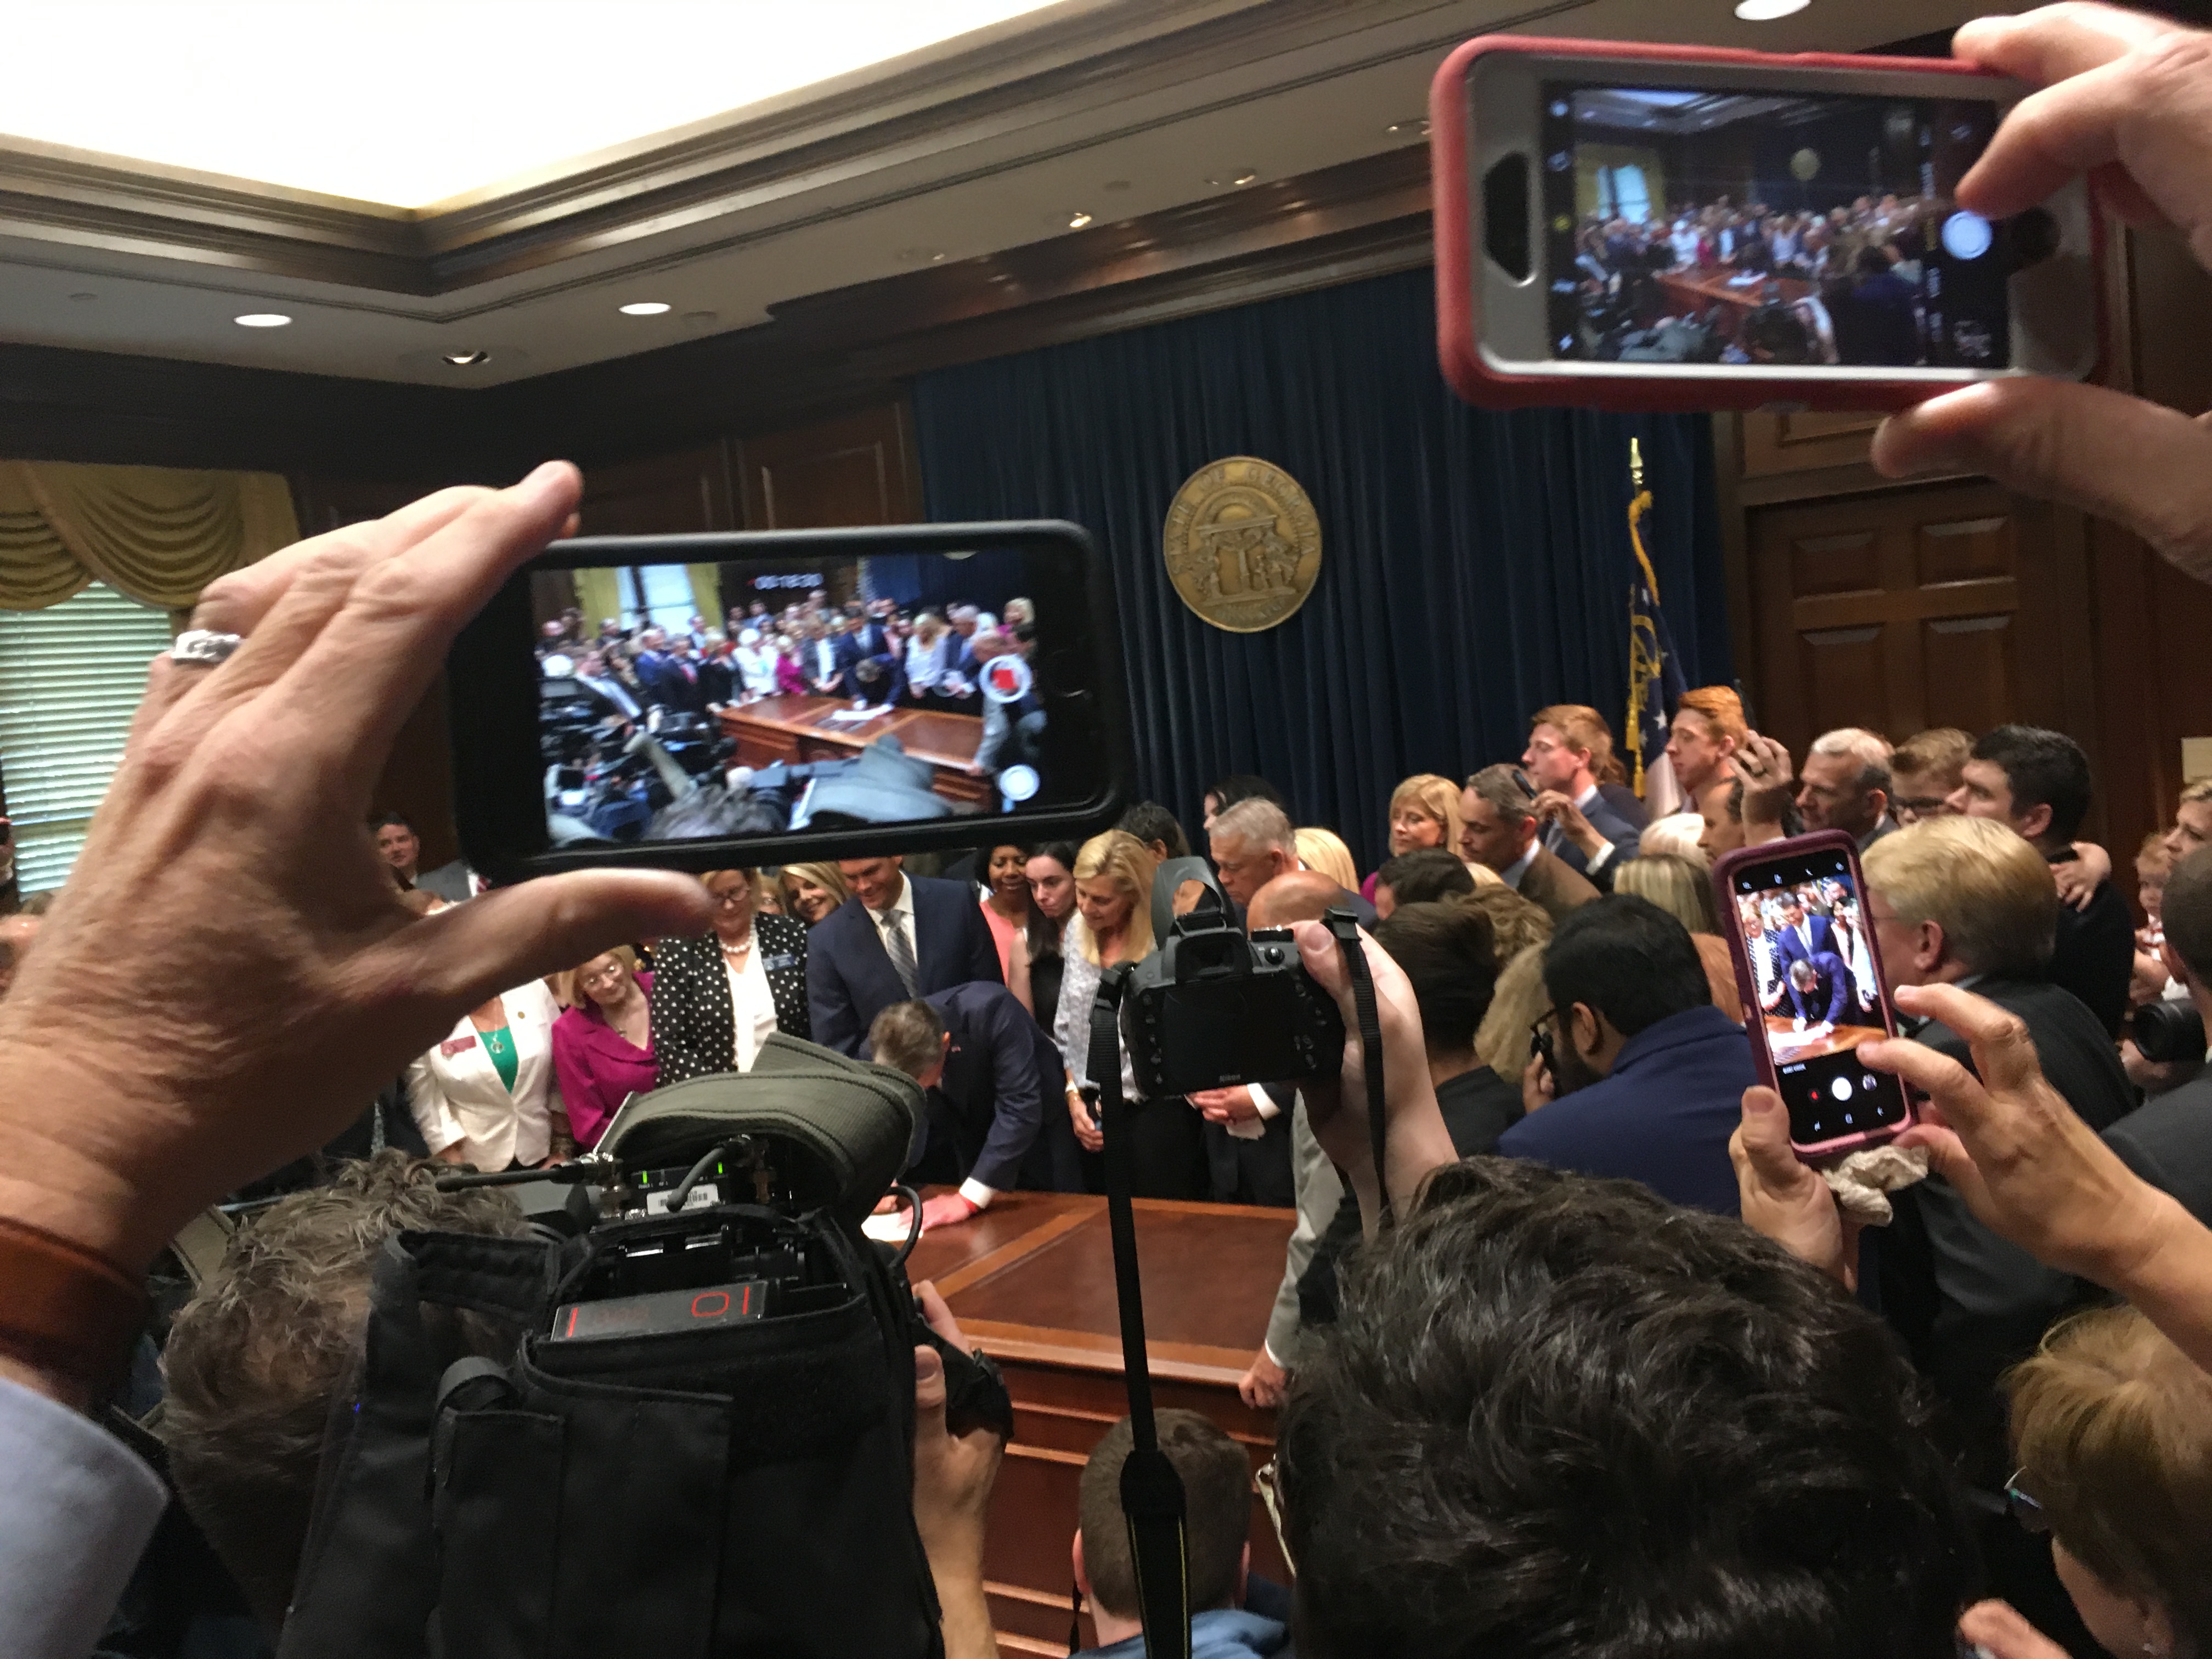 In front of supporters and media, Georgia Gov. Brian Kemp signed a bill he promised to support during his campaign: a near-total ban on abortion after six weeks of pregnancy. Credit: Maggie Lee